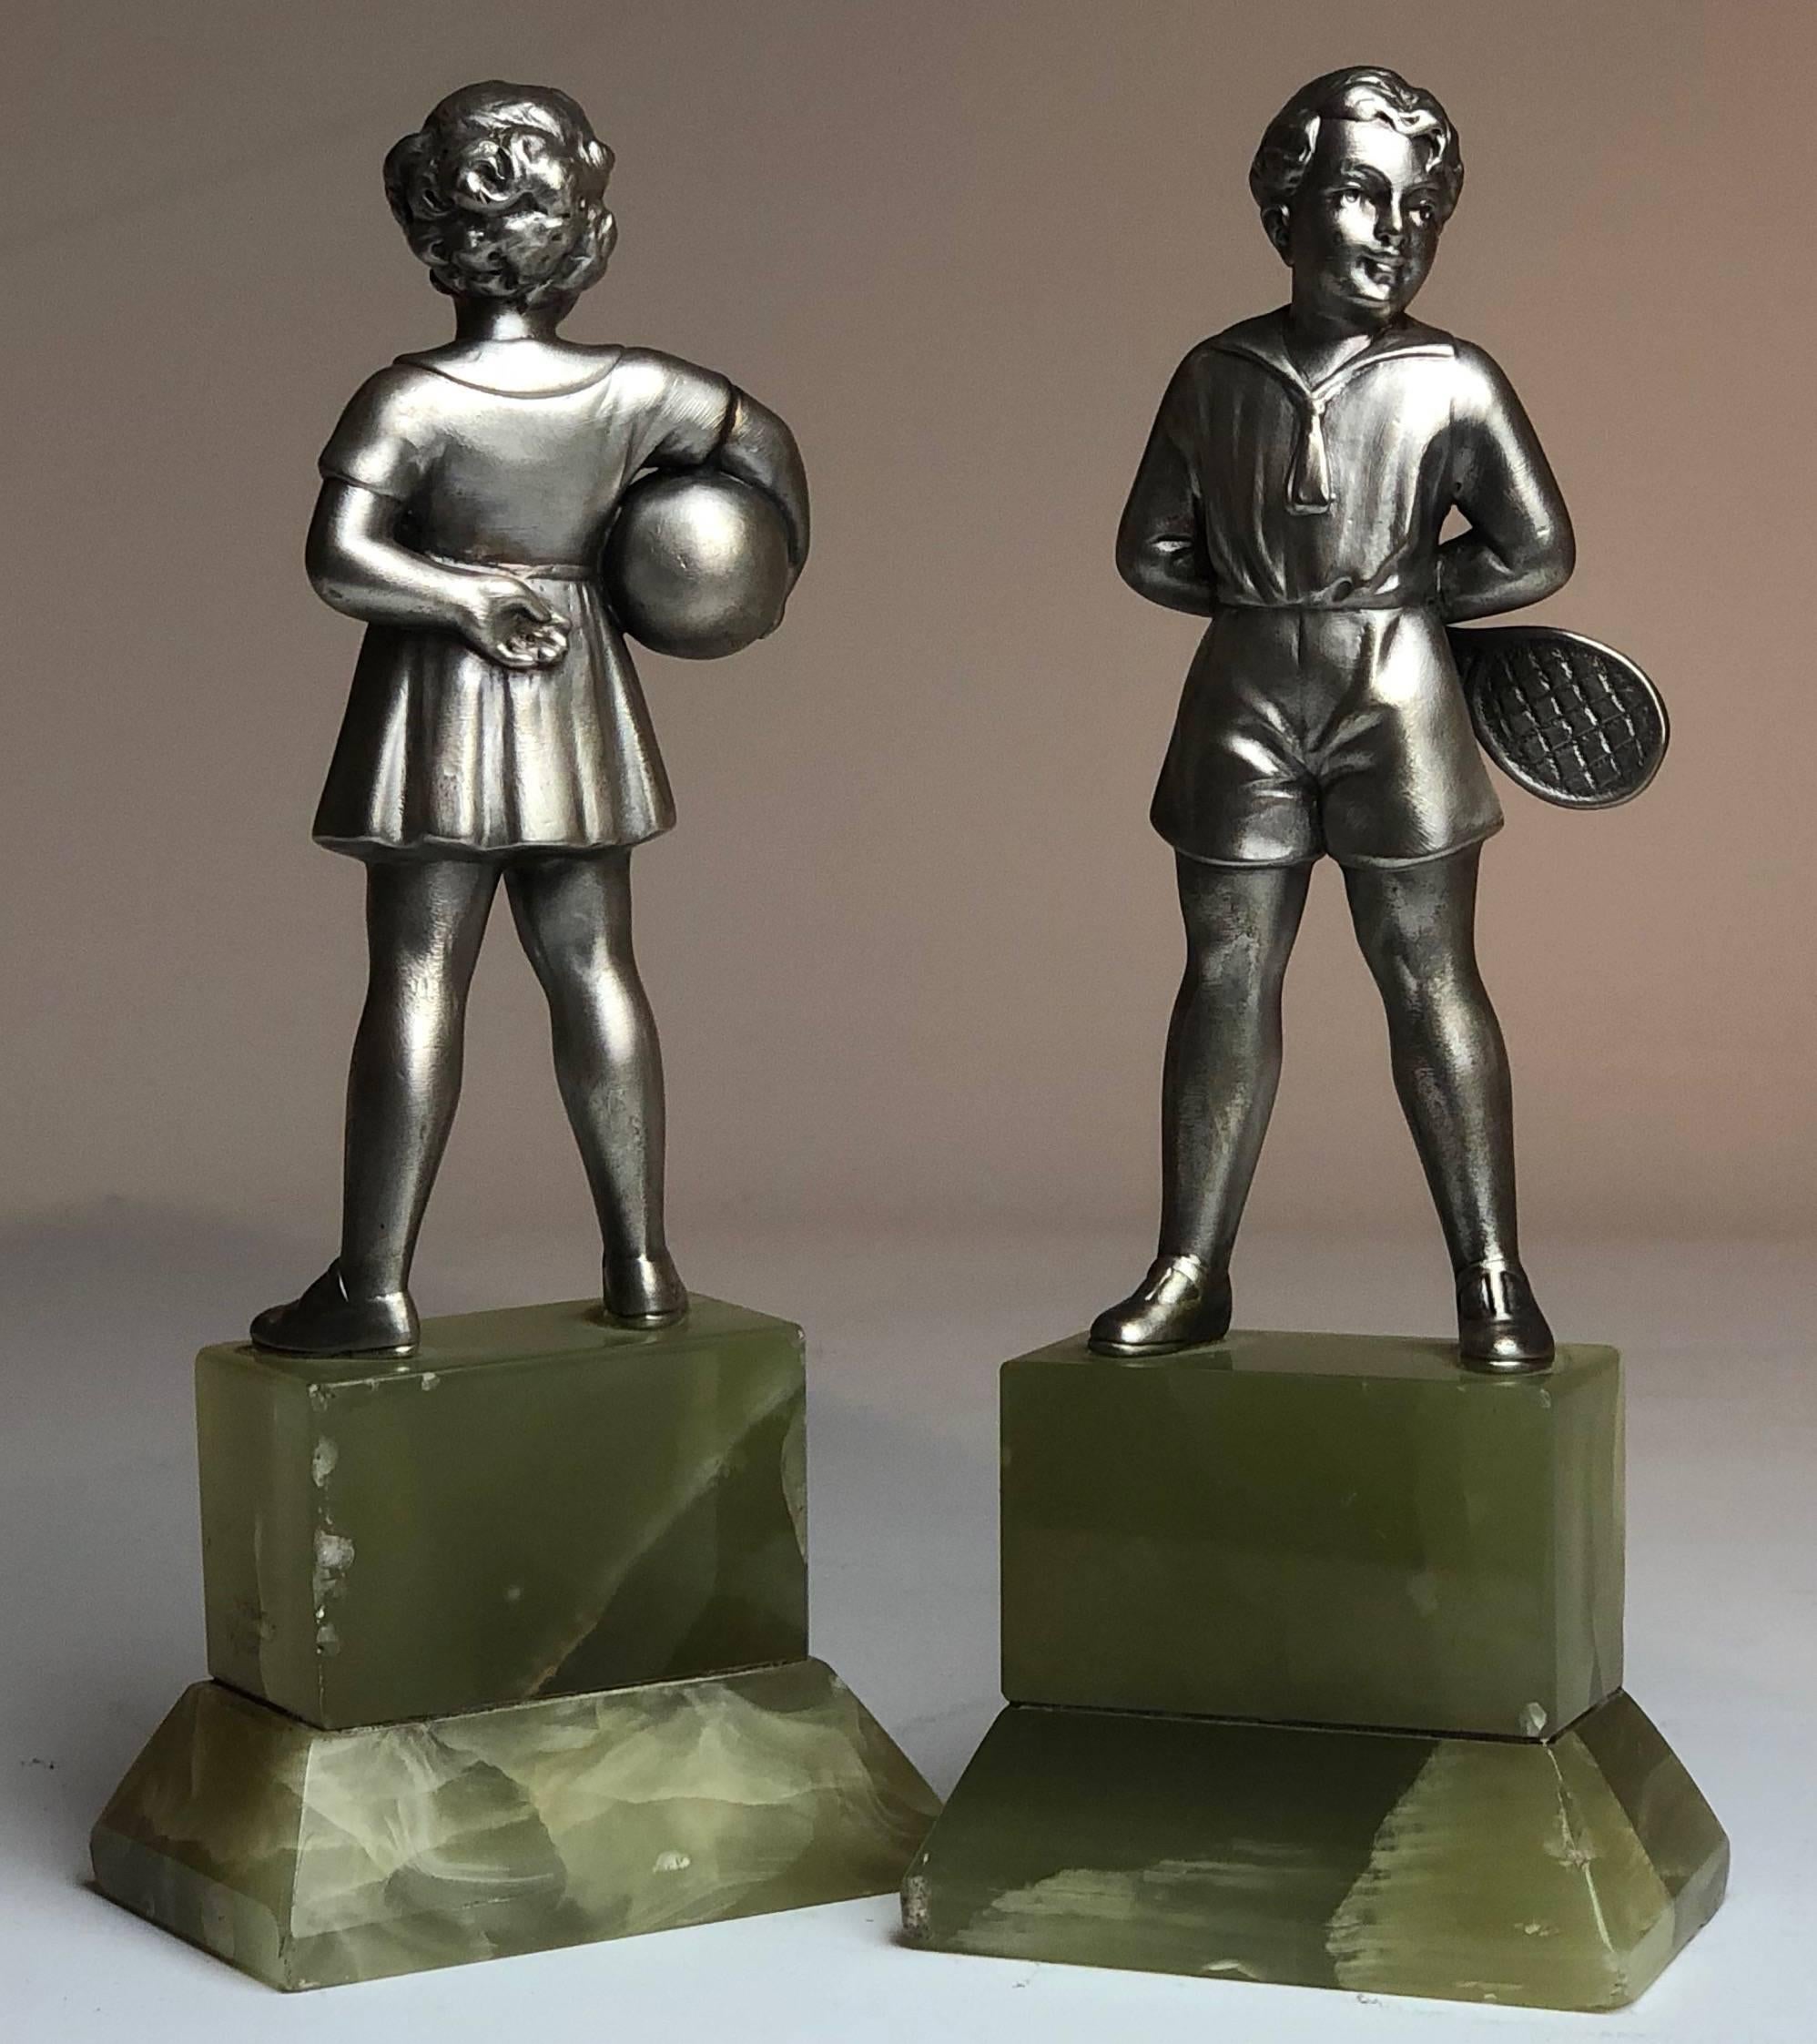 A delightful pair of early 20th Century Austrian cold painted bronze figure of a young boy tennis player holding his racket and young girl holding a ball, both signed R.Lor and raised on a shaped Brazilian green onyx plinth

Each stand 7" tall